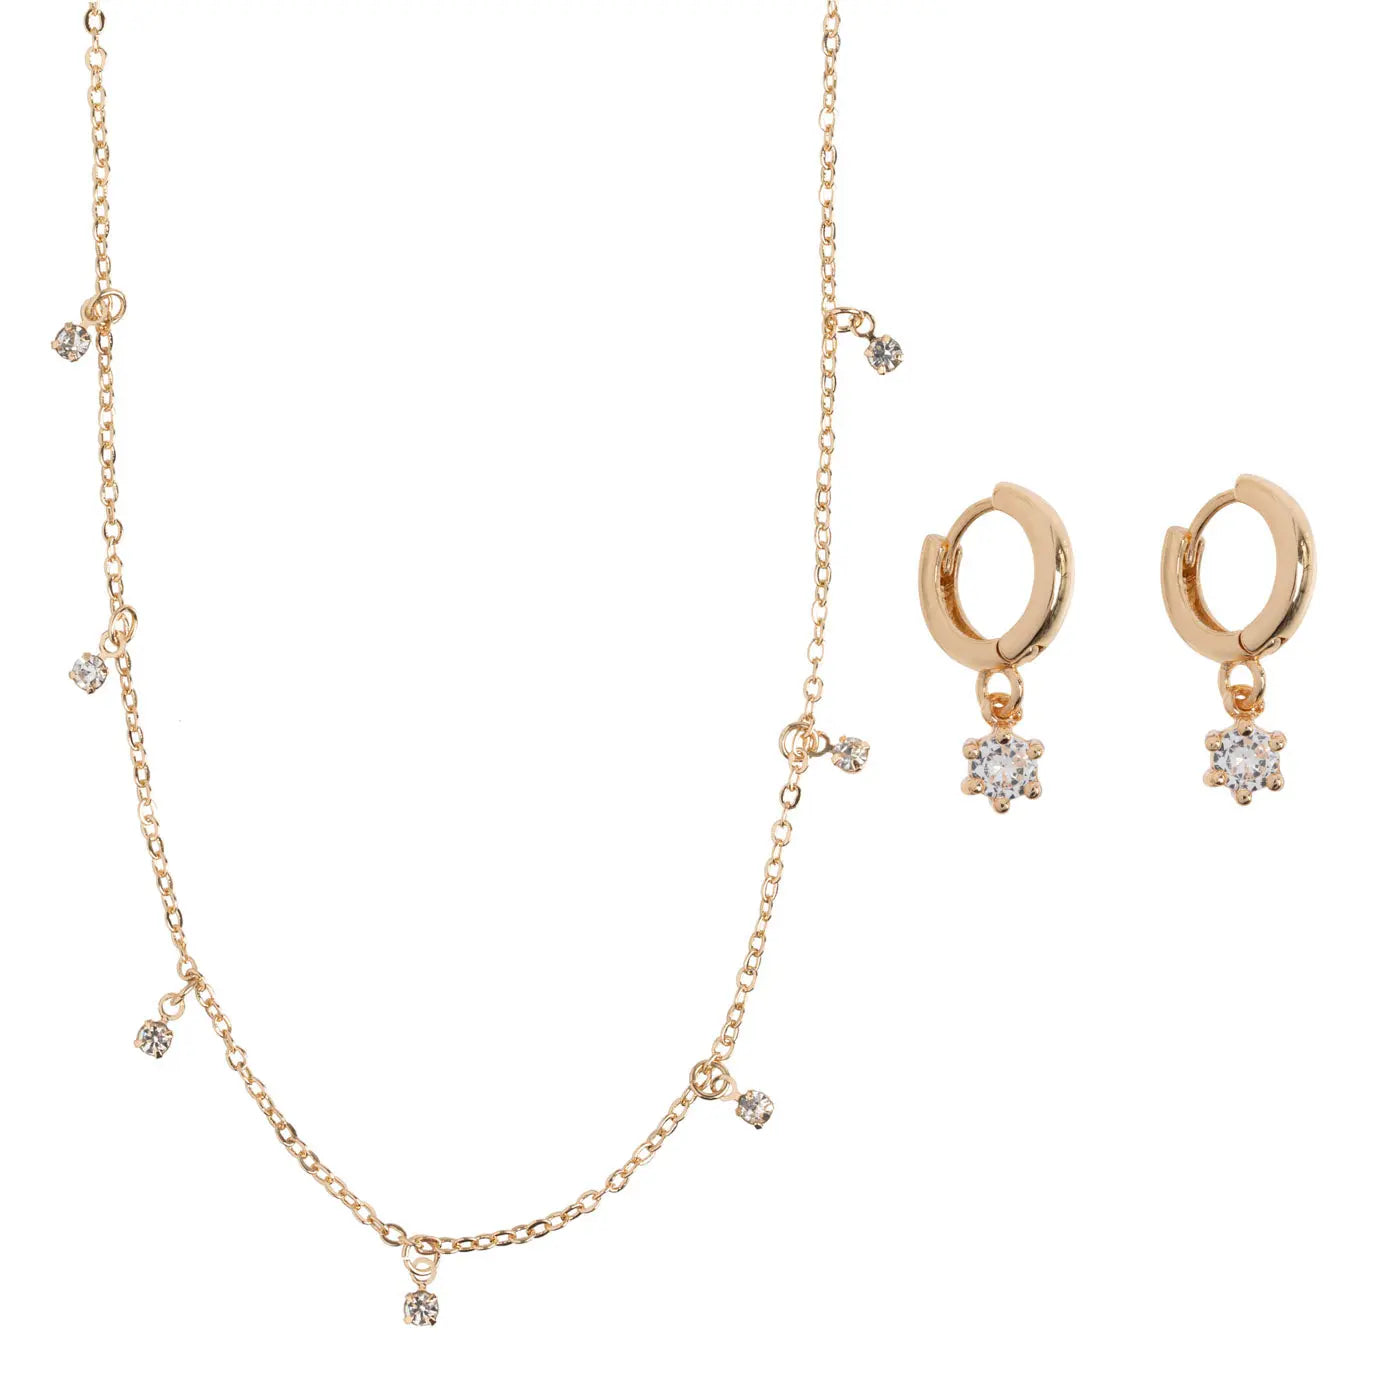 Star Set with Crystal Necklace and Earring Hoops